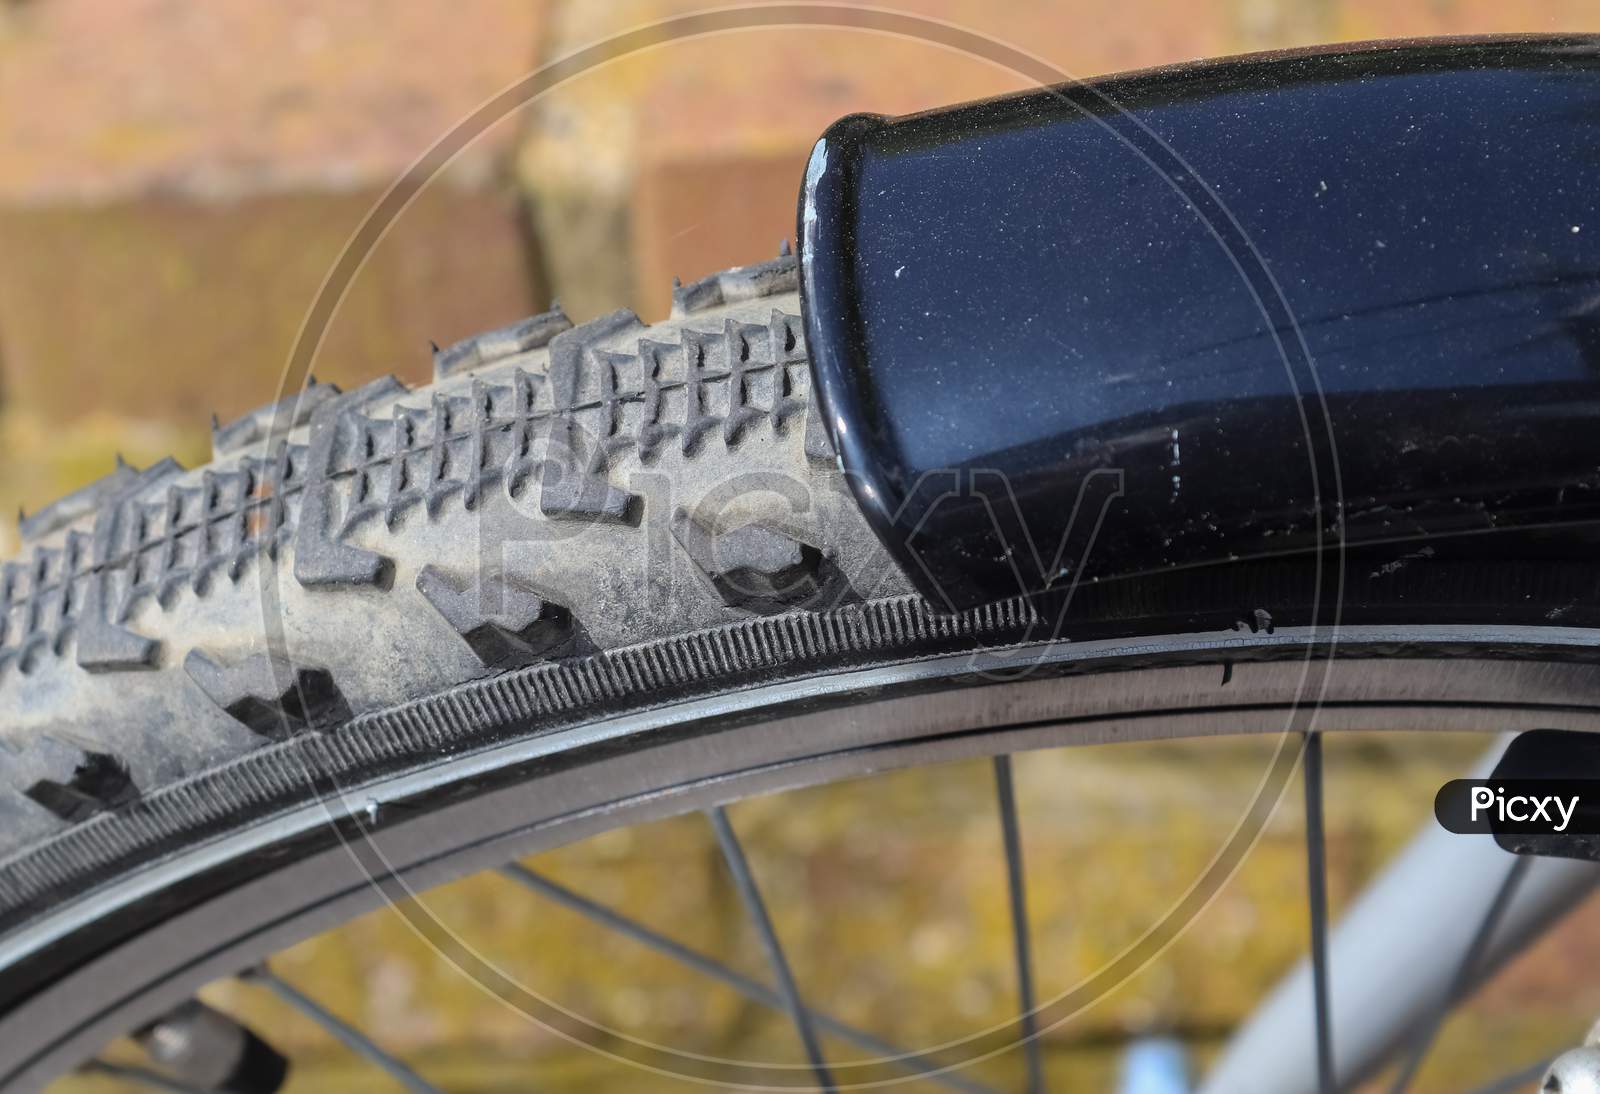 Close up view at a bicycle wheel with metal spokes